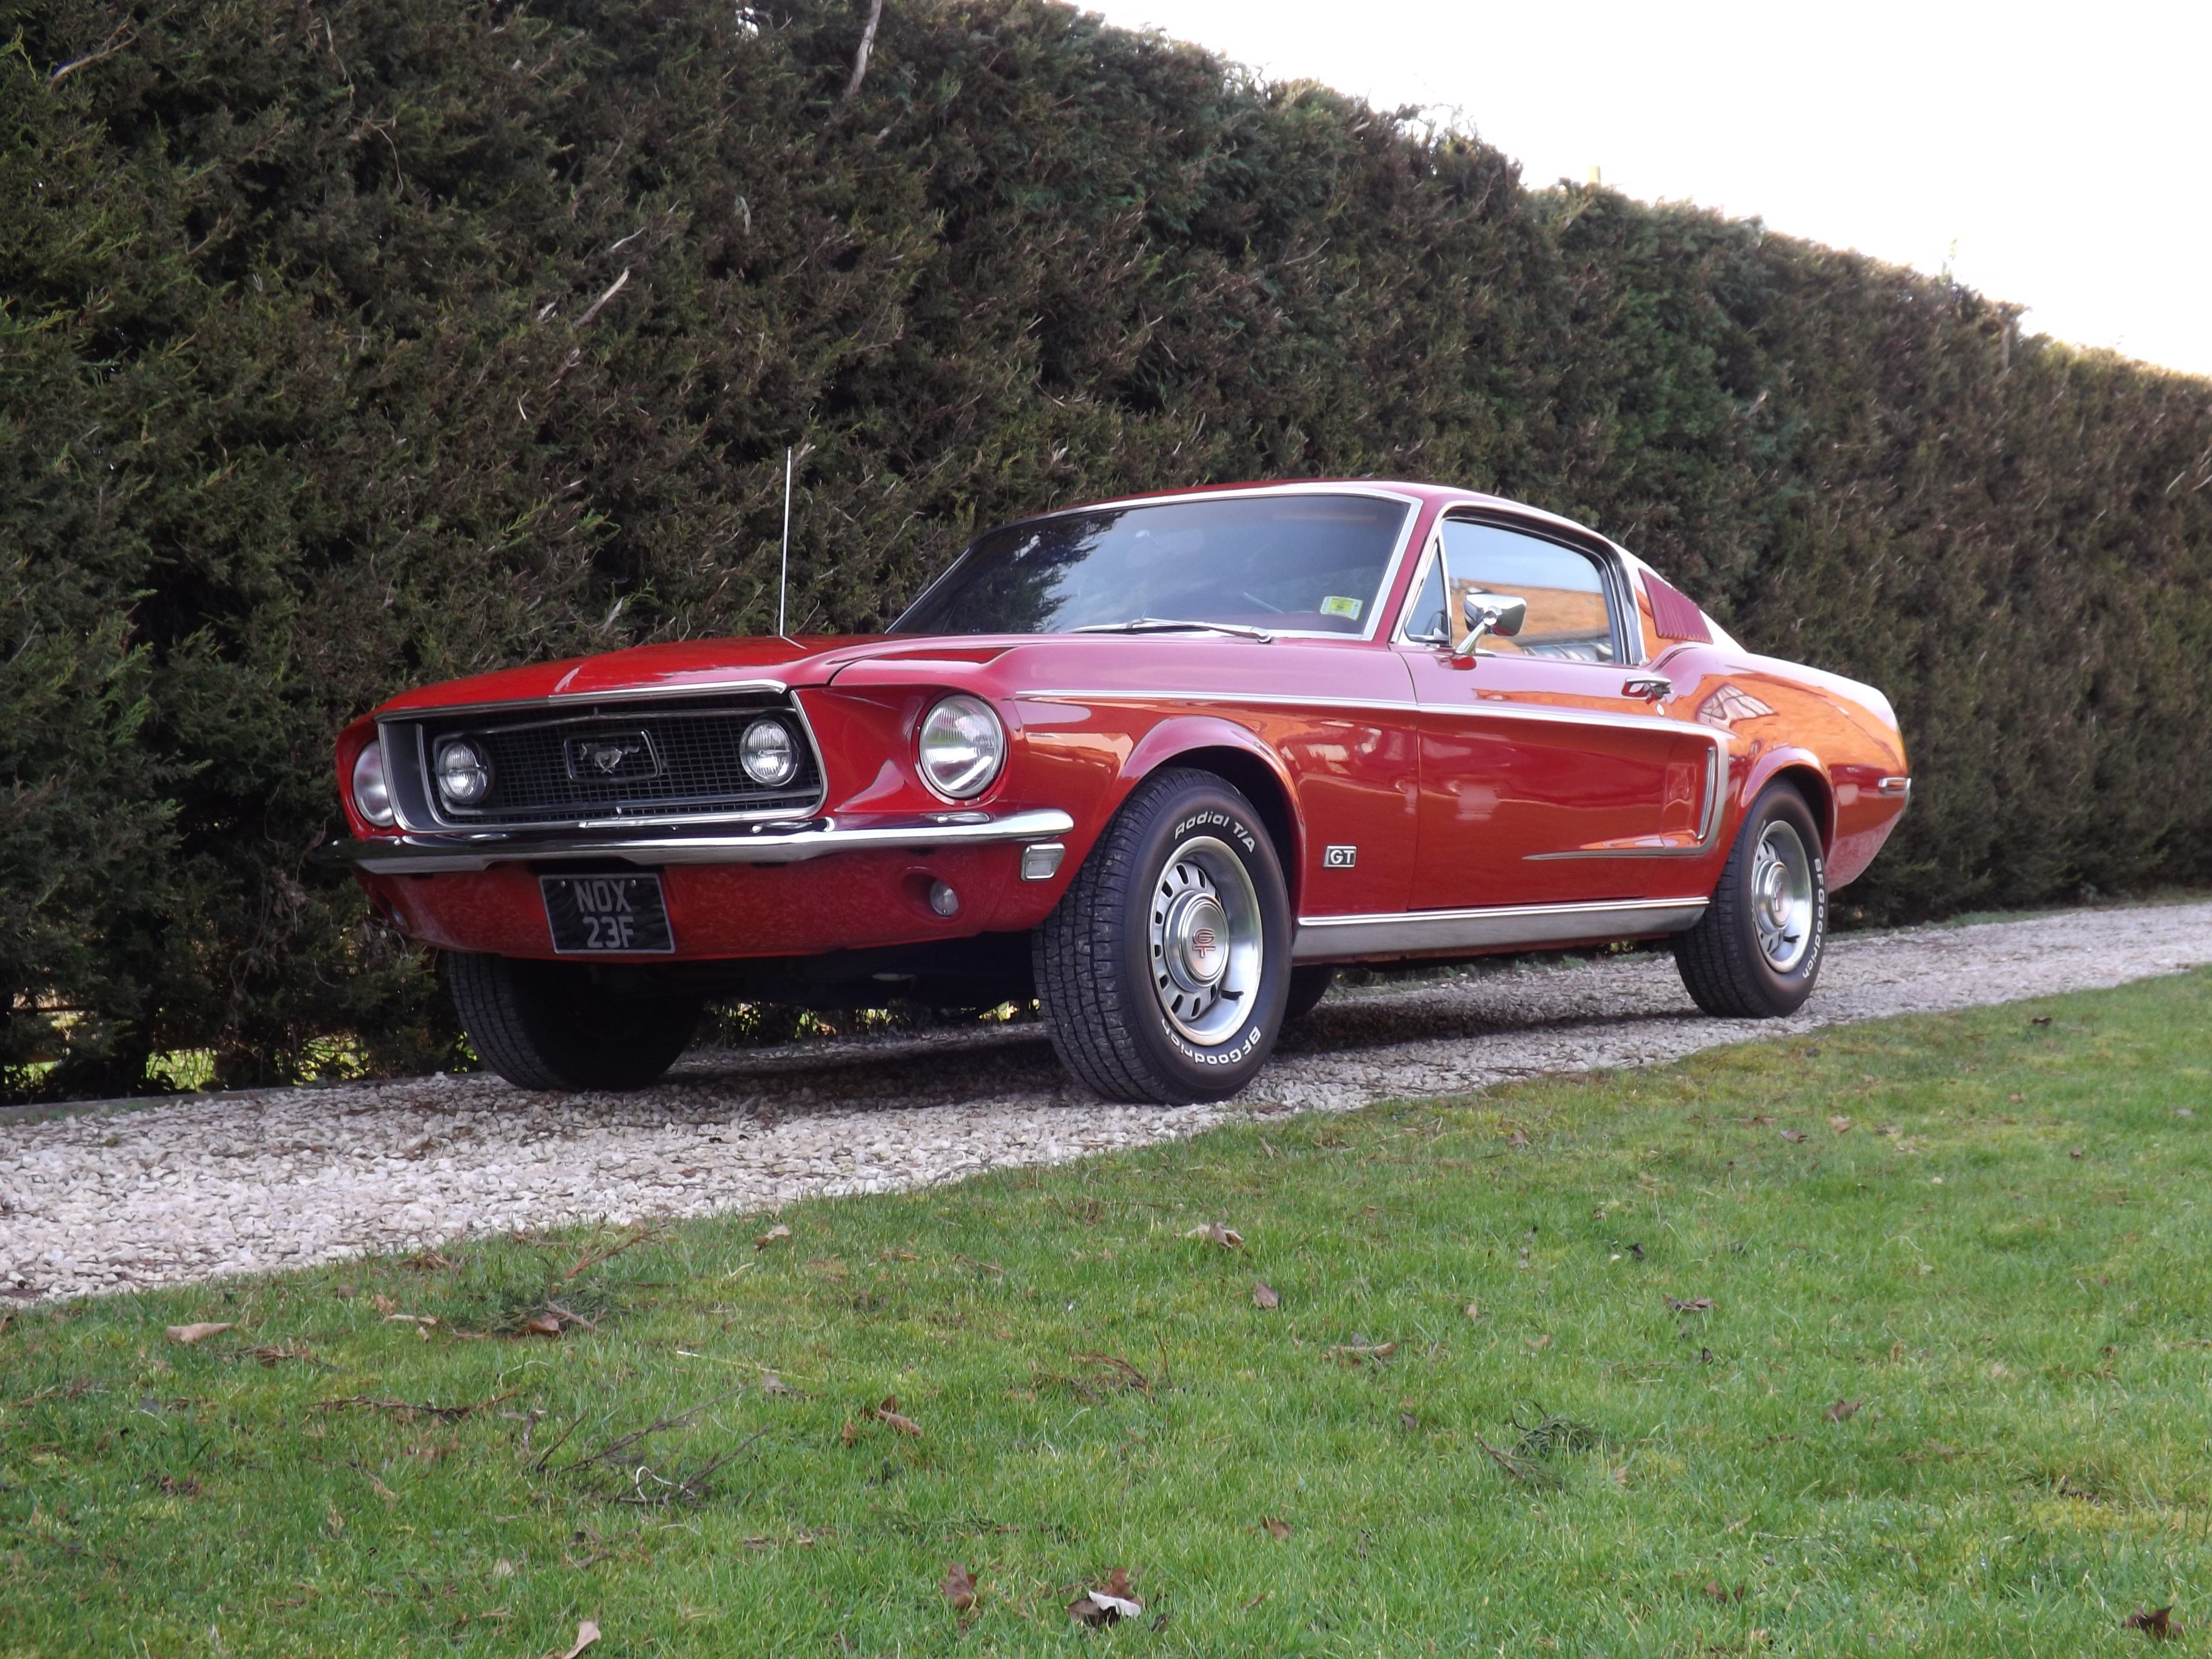 1968 Ford Mustang GT Fastback: The muscle car built for all ages.